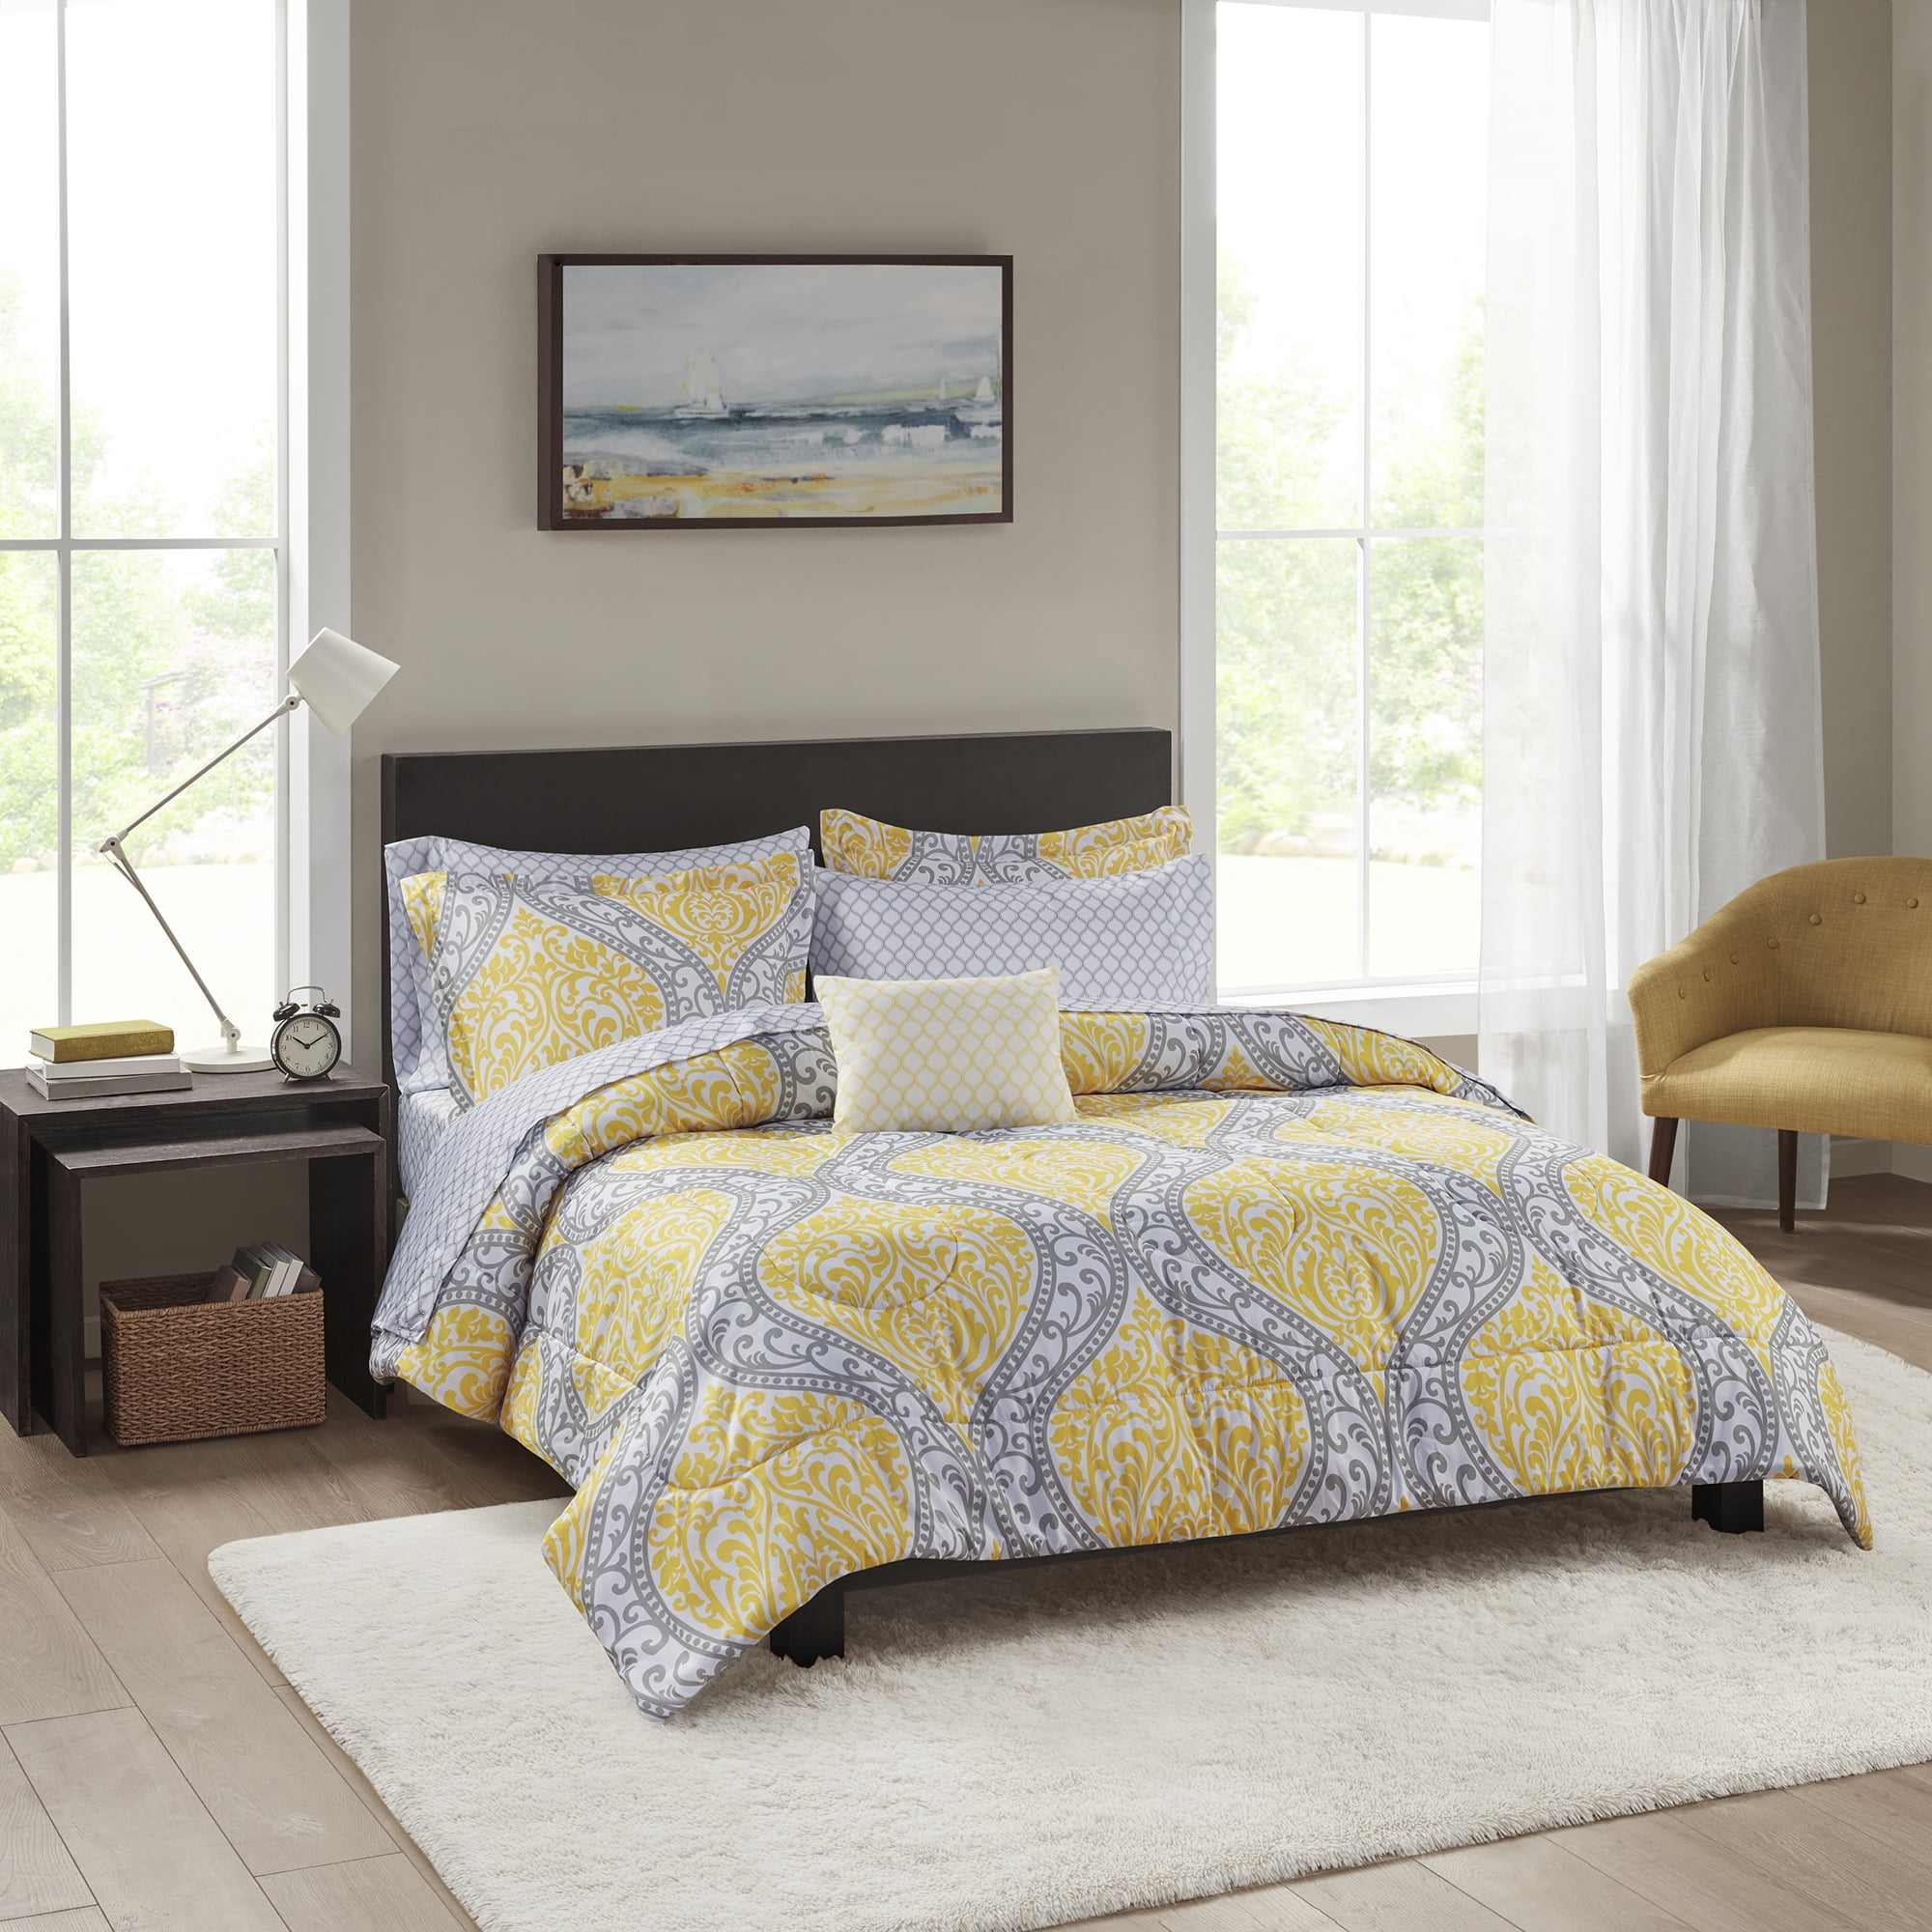 6 Piece Bed In A Bag Bedding Set, Yellow Gray Twin Bedding